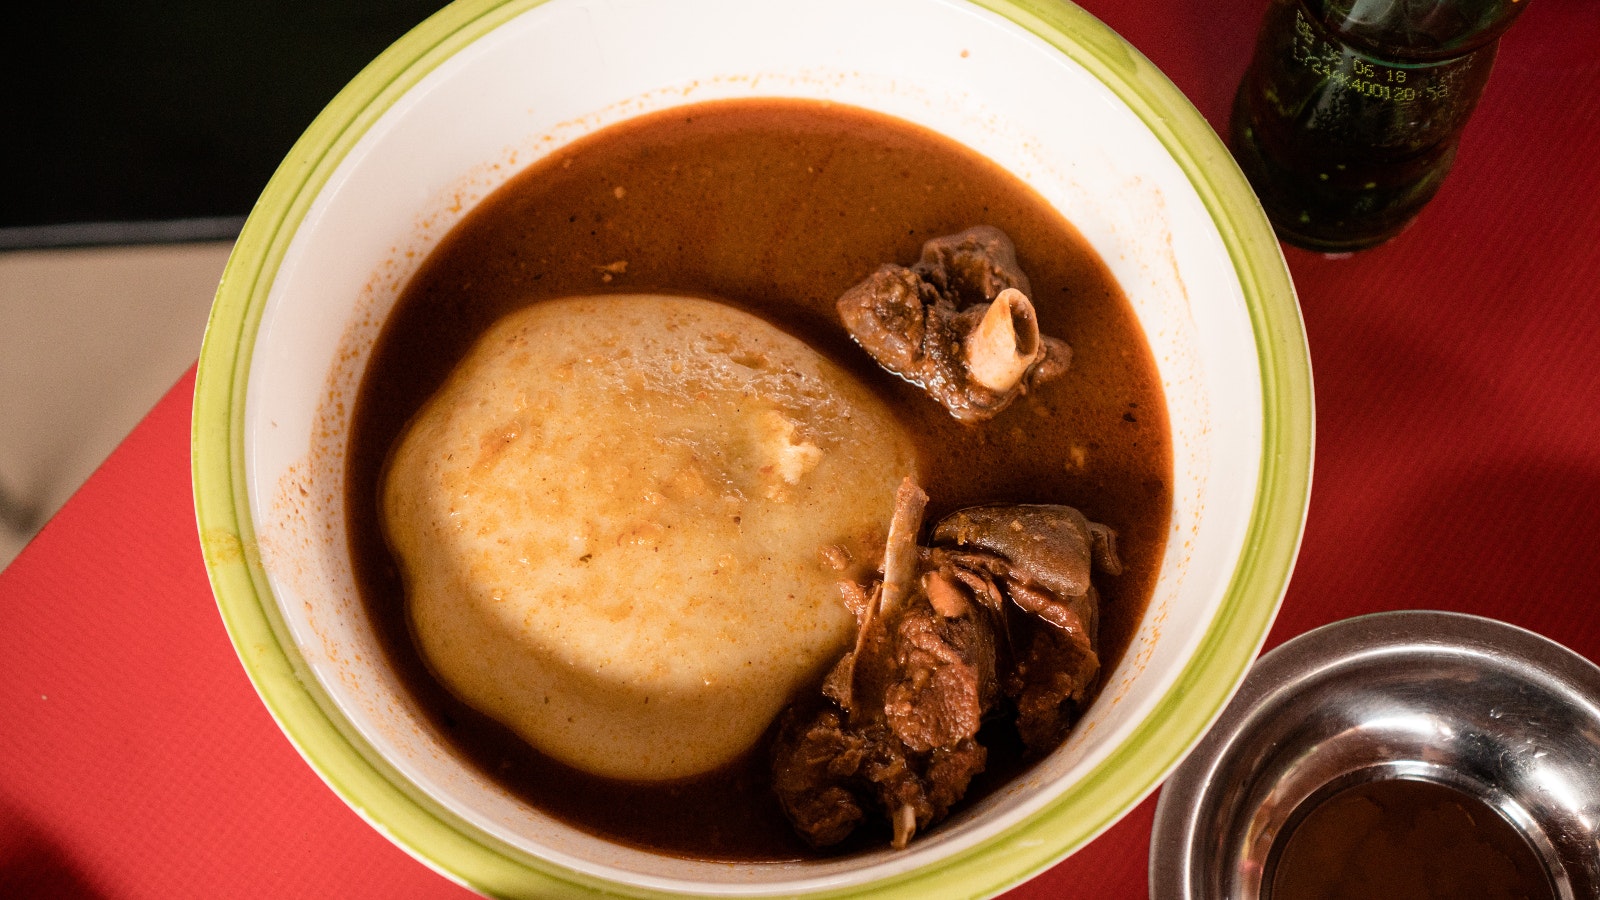 Within a green-rimmed white bowl (on a red table cloth) is the traditional dish of fufu. Sitting in reddish light soup is a ball of yellowish dough made from cooked (and pounded) plantain and cassava. Next to this sits some goat meat and bones © Elio Stamm / Lonely Planet